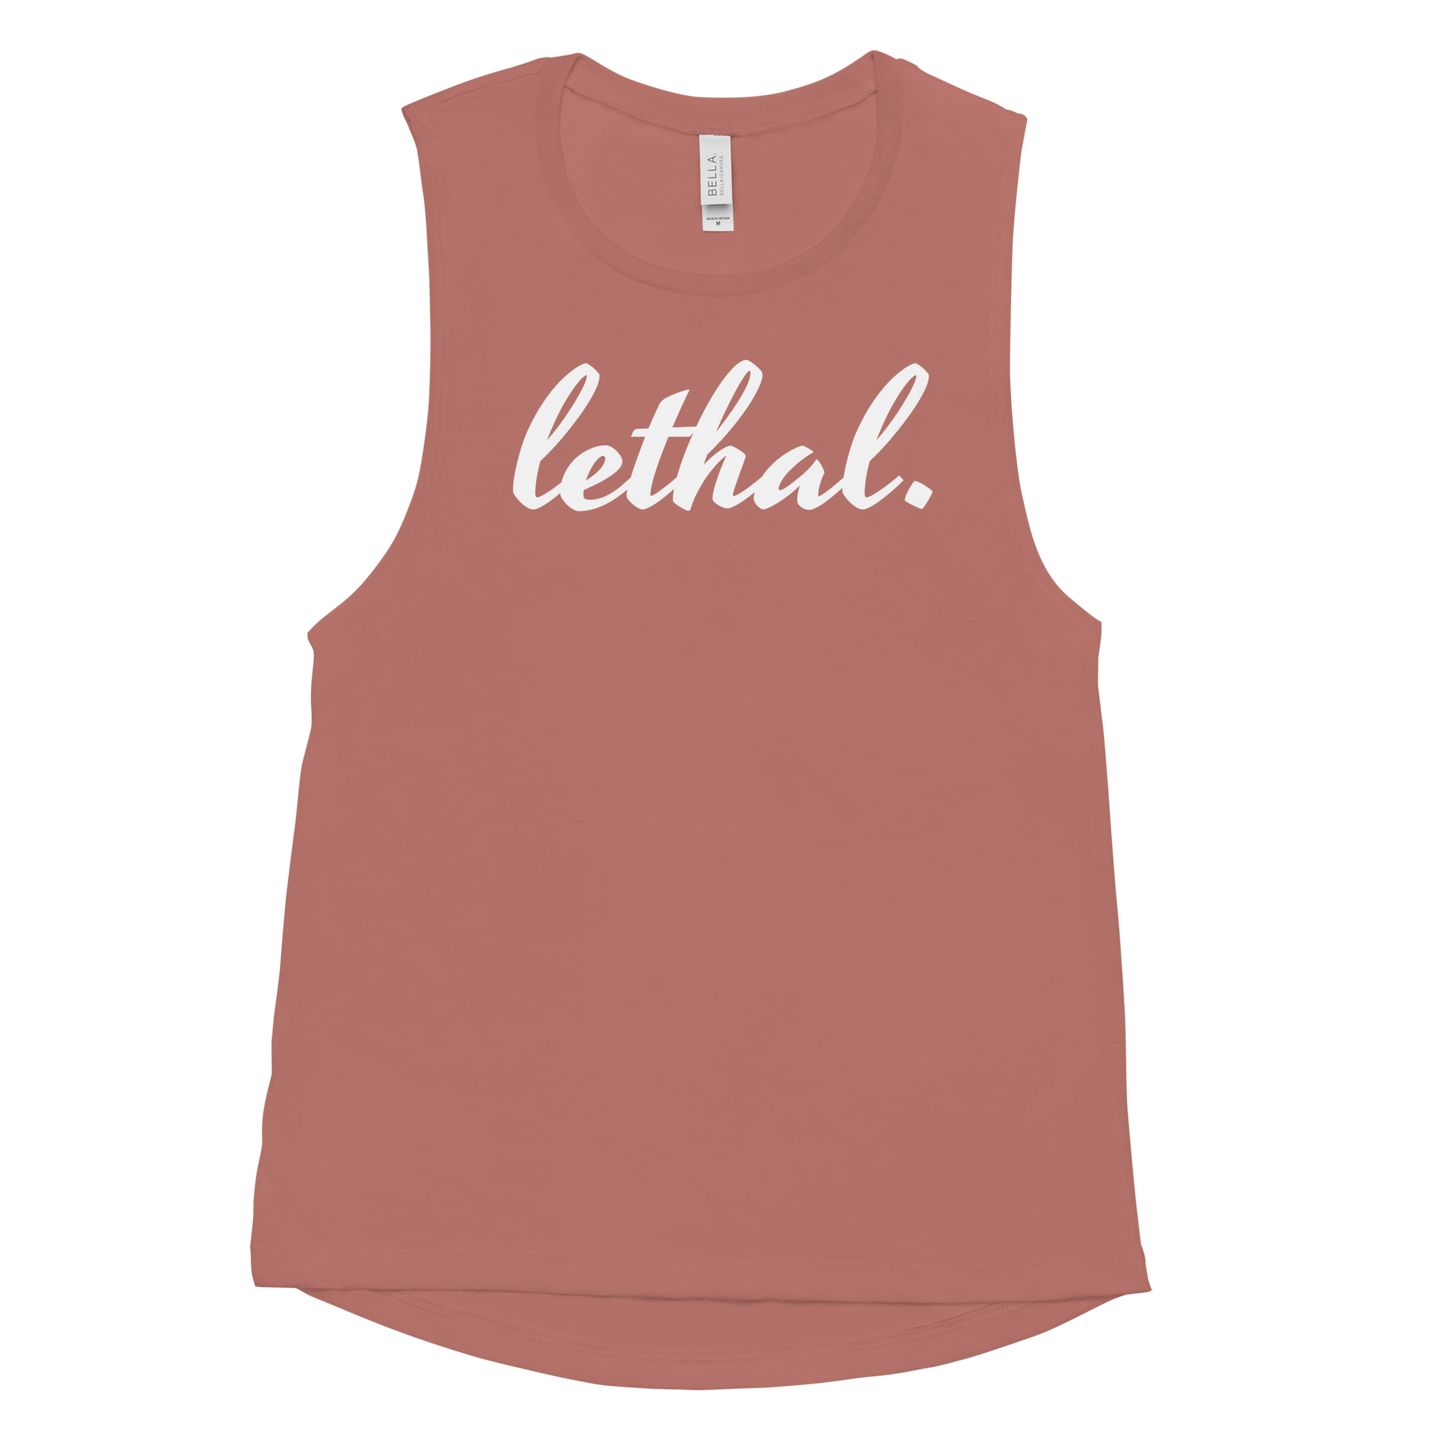 Lethal Signature Women's Tank Top